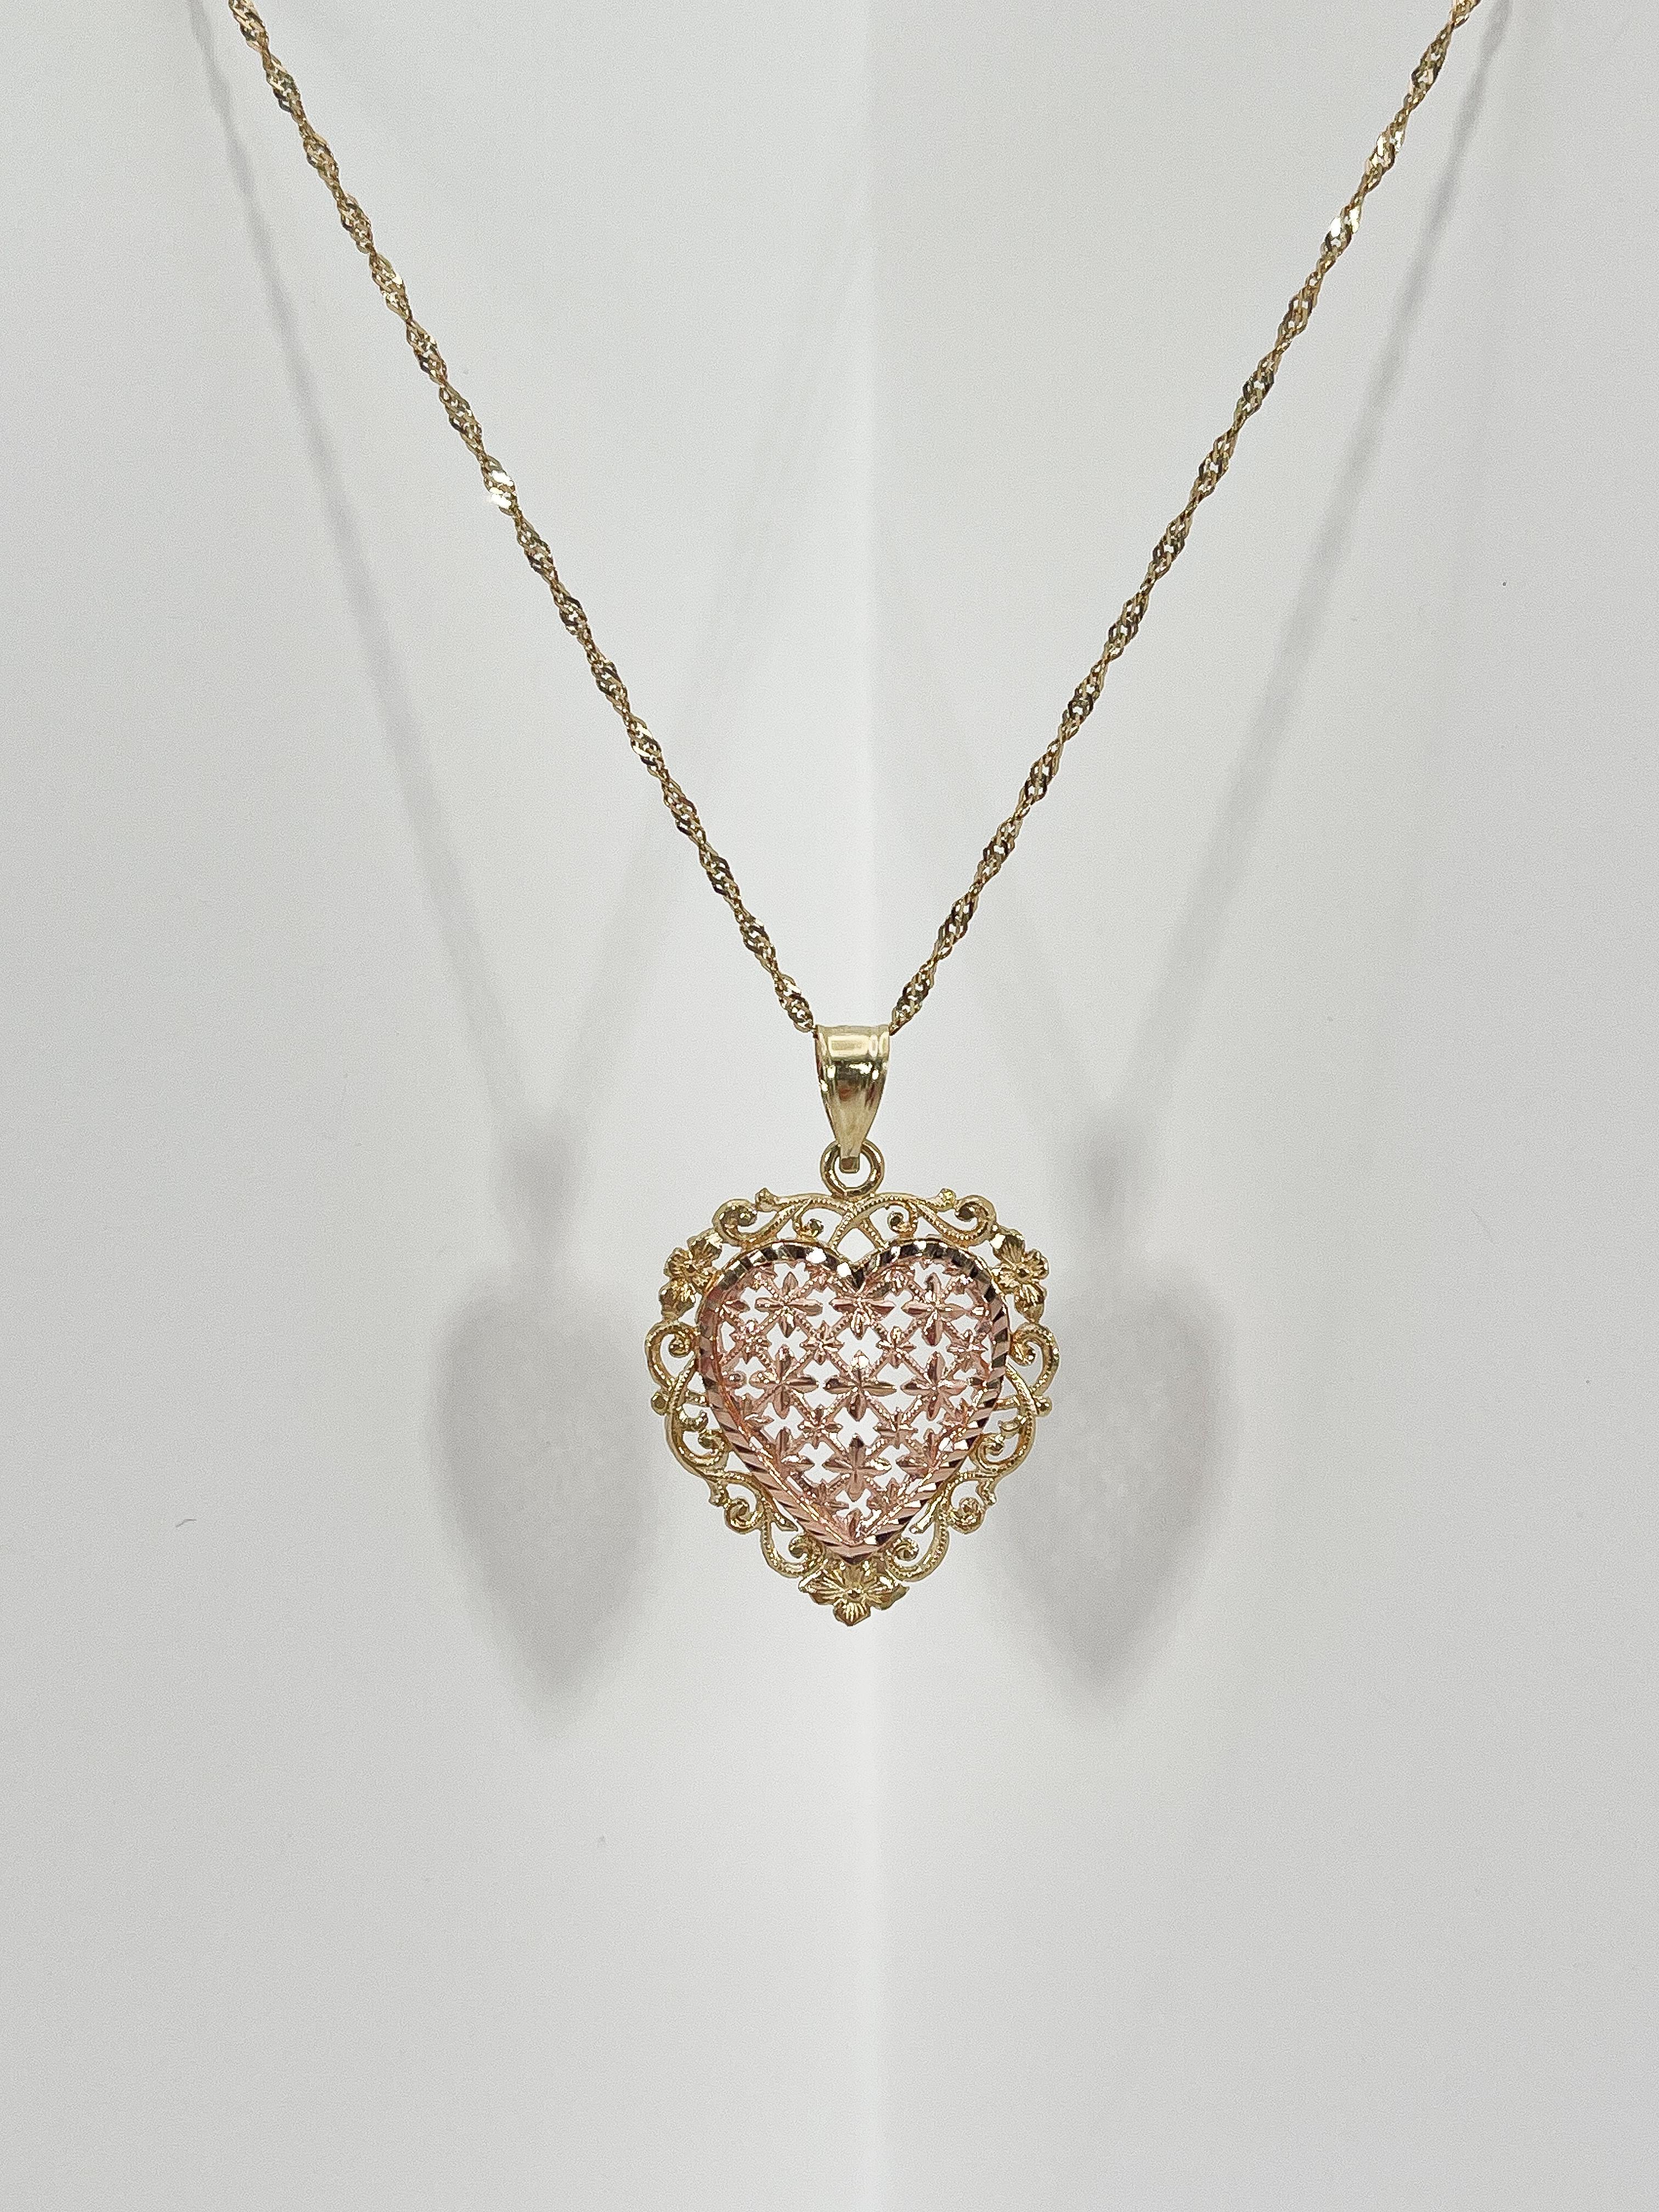 14k rose and yellow gold filigree heart pendant necklace. Pendant measures to be 20.5mm x 20.5mm, comes on an 18 inch diamond cut twist chain, has a spring ring to open and close necklace, and necklace has a total weight of 3.2 grams.